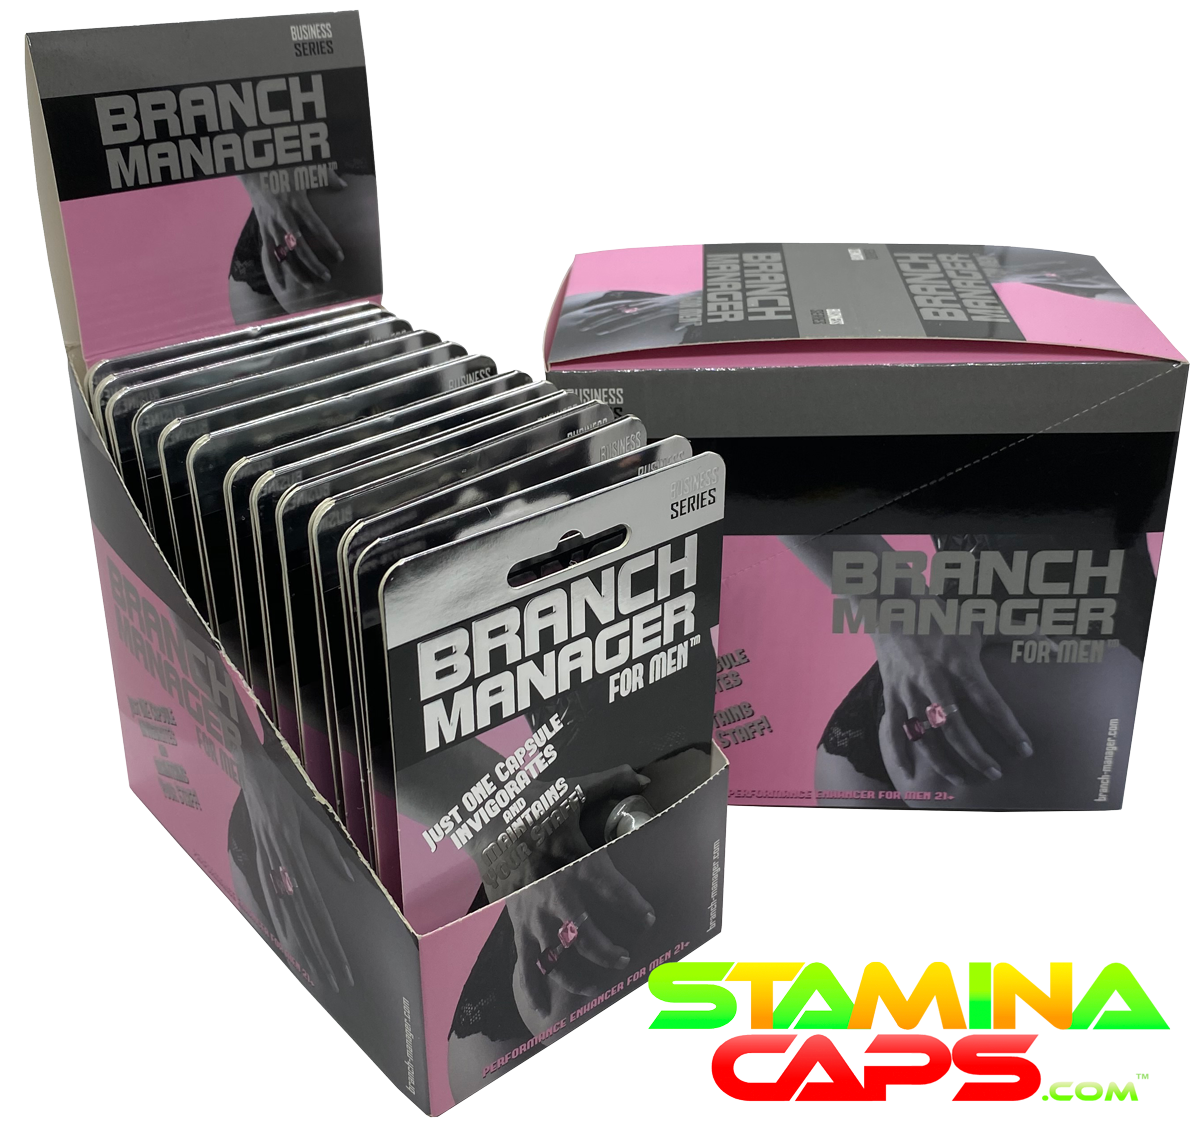 Branch Manager for Men - SPECIAL EDITION 24 Single Packs w/ FAST & FREE SHIPPING!  NOW ON SPECIAL INTRODUCTORY SALE FOR ONLY $79 FOR A LIMITED TIME!!!  (Regularly $91.99)!!